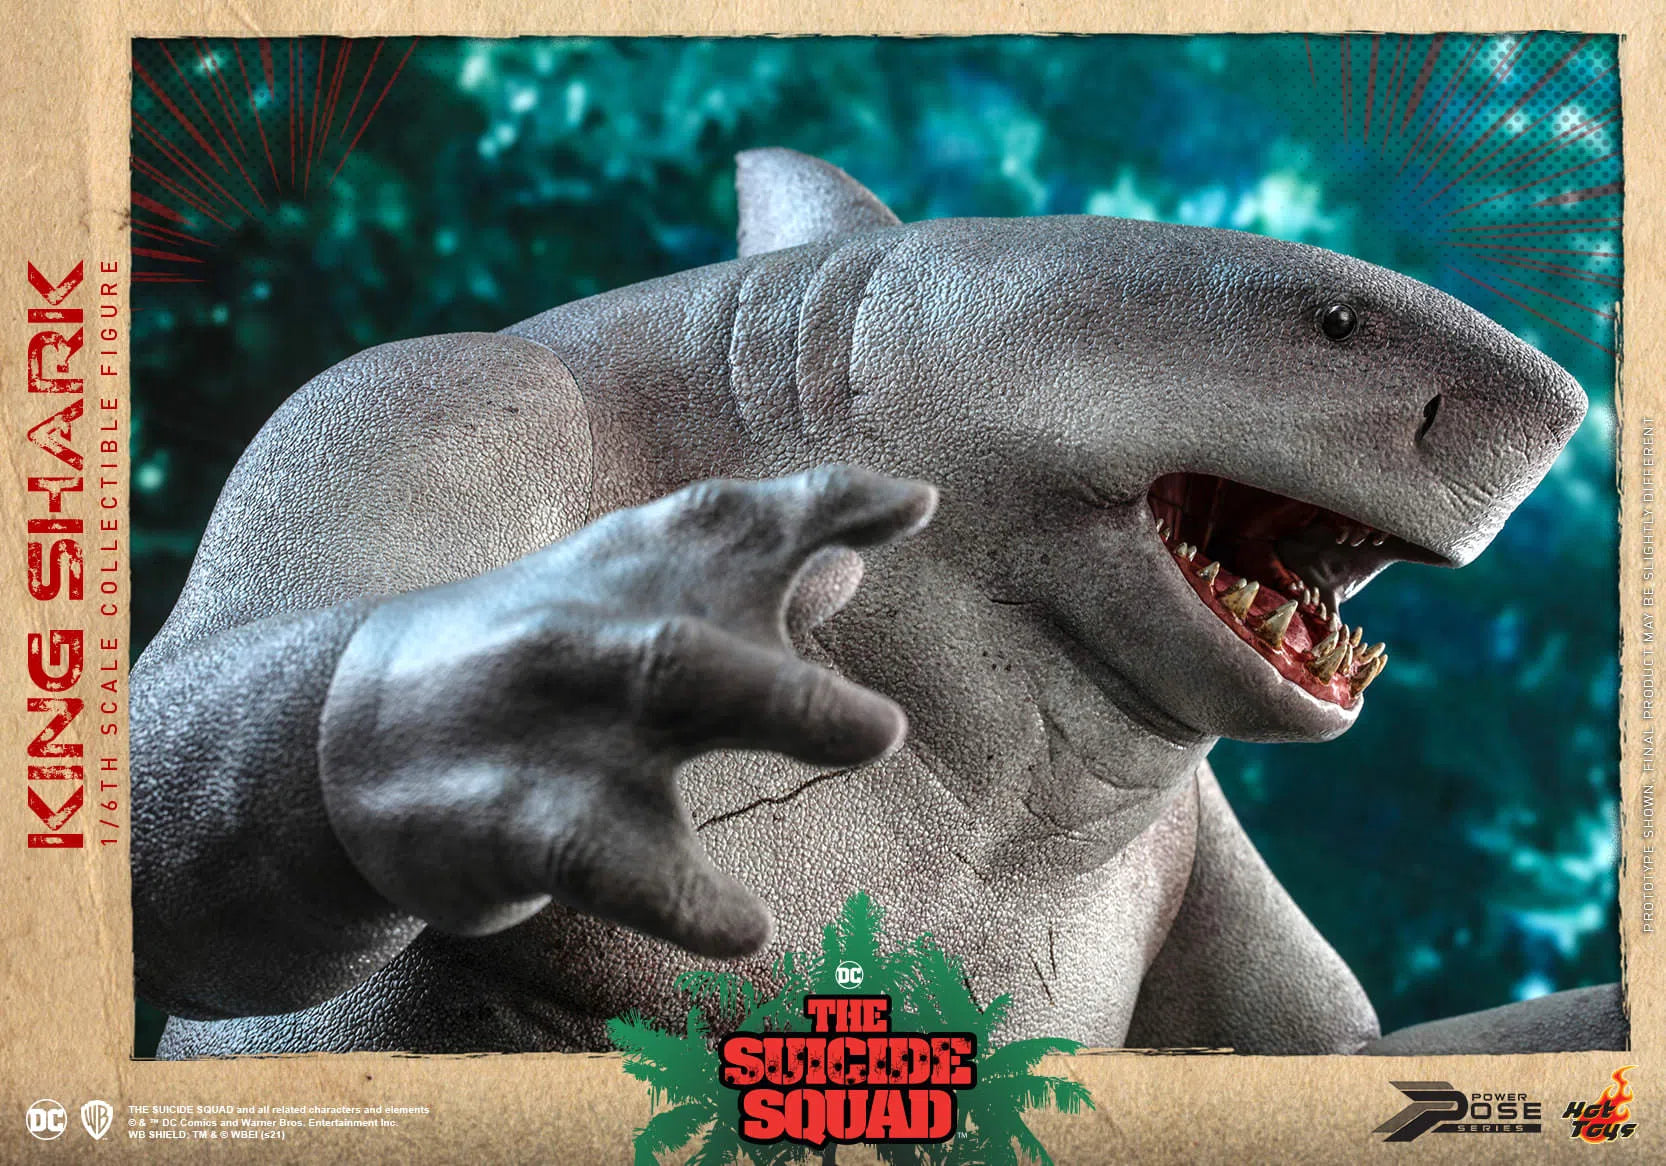 King Shark: The Suicide Squad: DC Comics: Power Pose: PPS006: Hot Toys